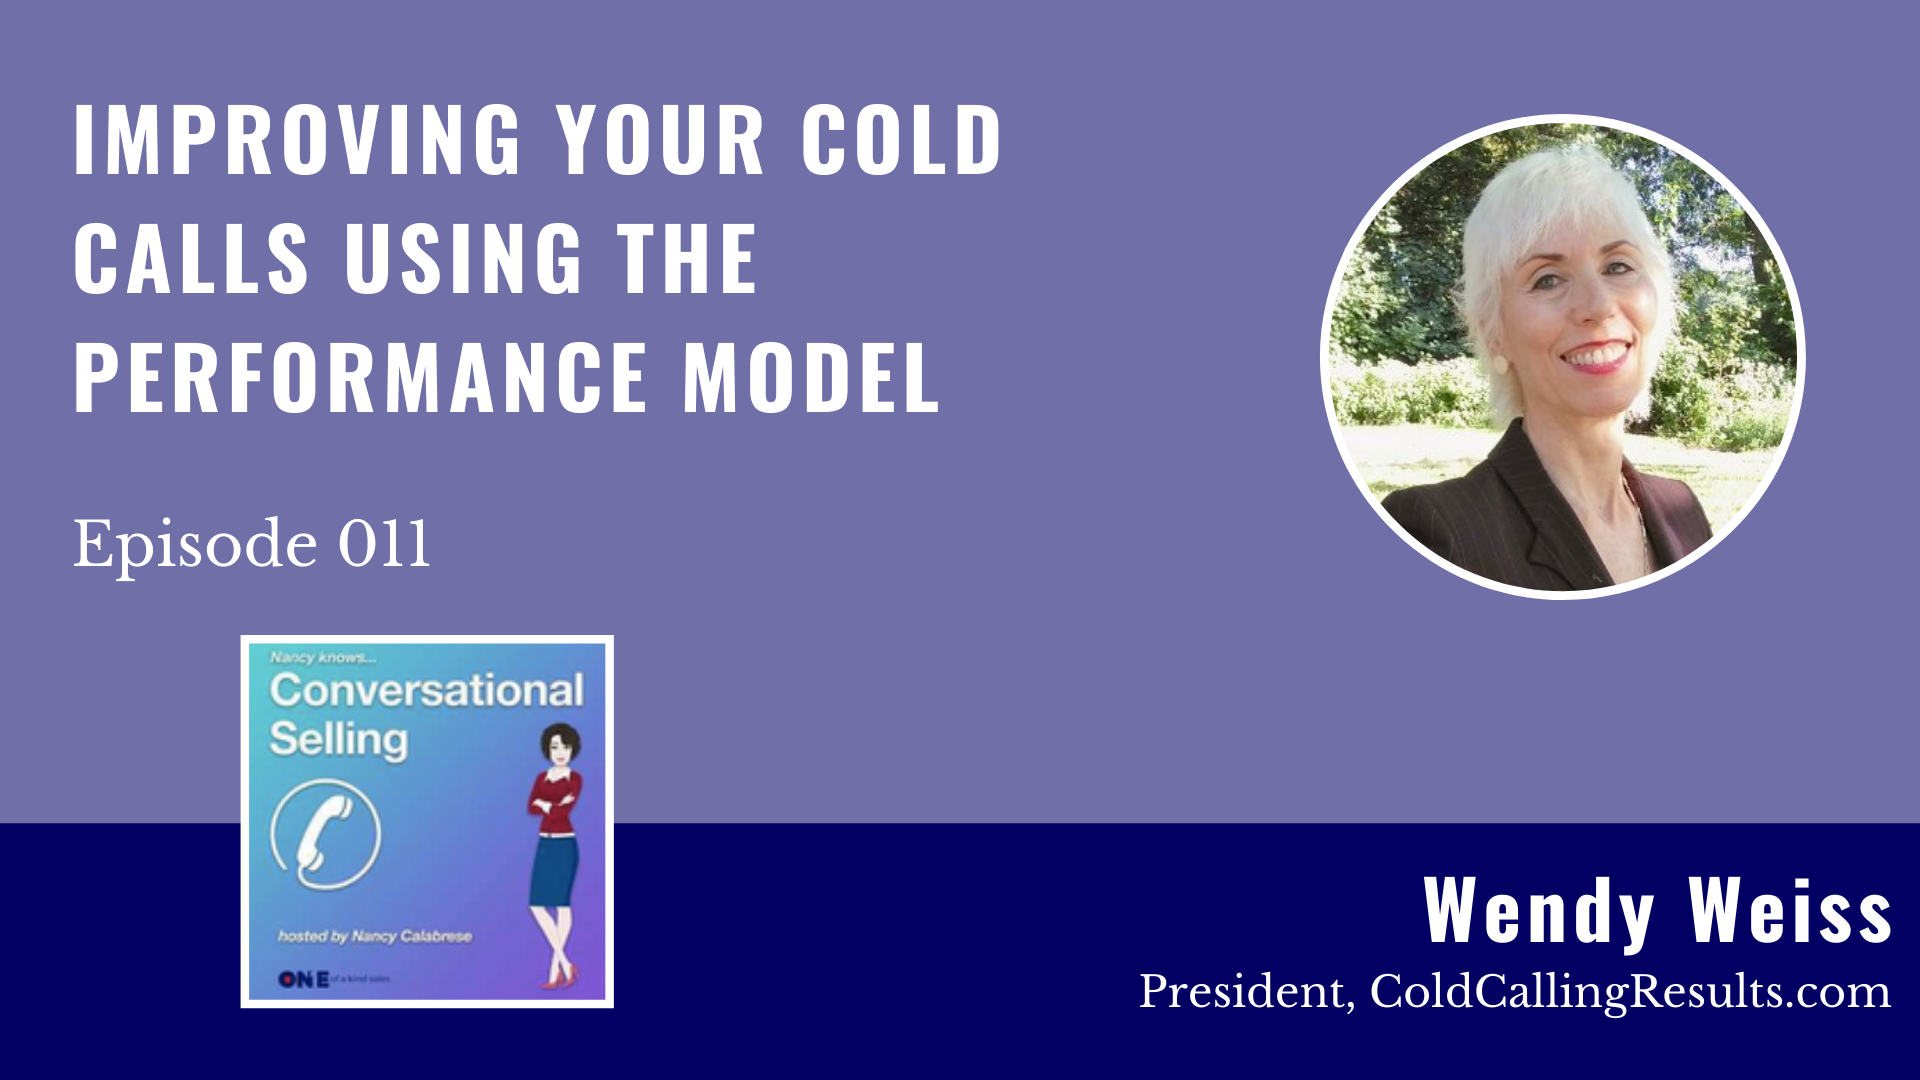 Wendy Weiss | Improving Your Cold Calls Using the Performance Model